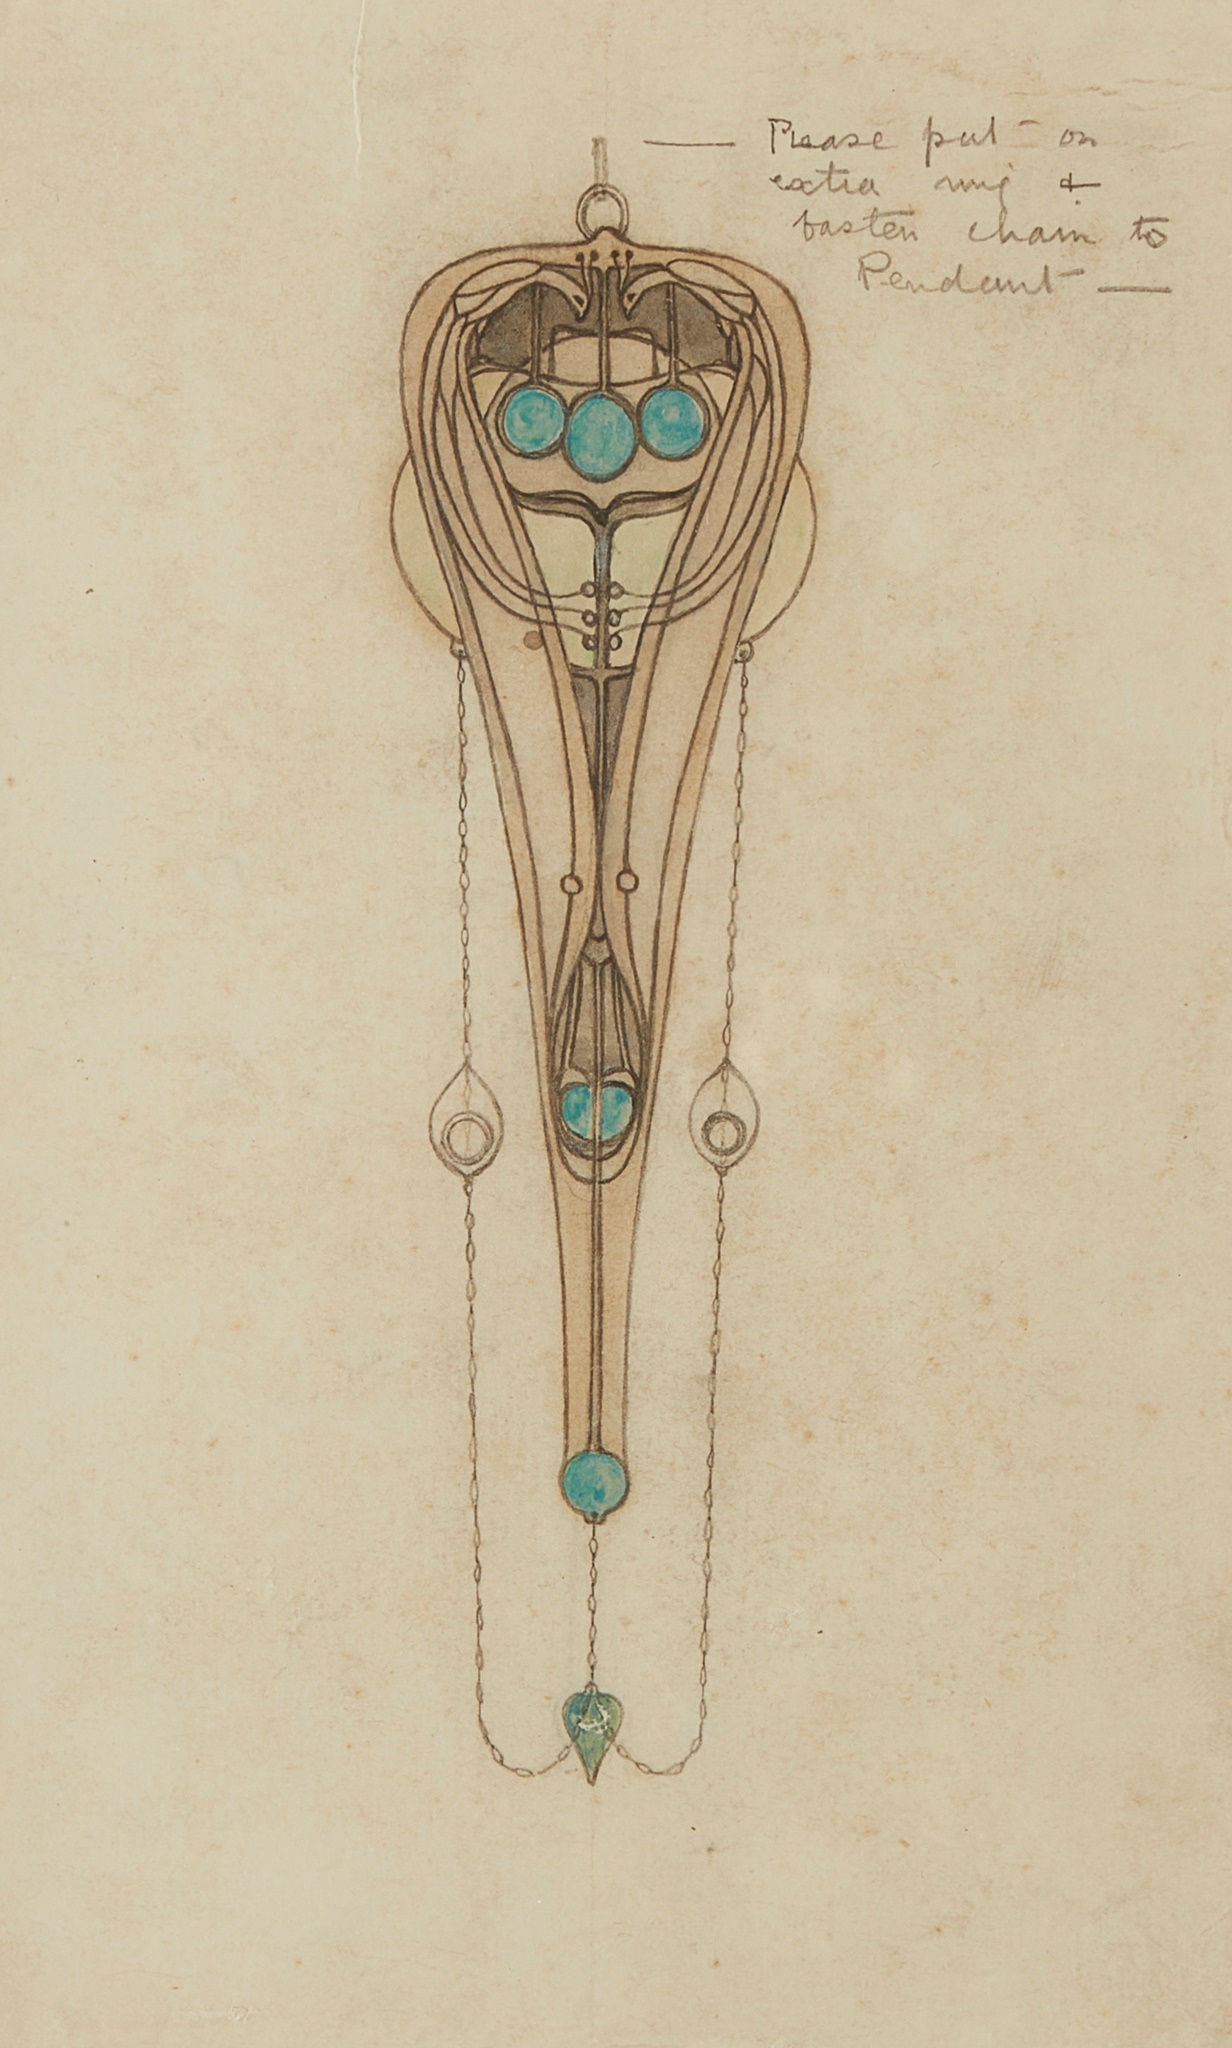  LOT 354 | FRANCES MACDONALD MCNAIR (1873-1921) | DESIGN FOR JEWELLERY, CIRCA 1900 pencil and watercolour on paper, bearing inscriptions in pencil | Provenance: The Fine Arts Society, London | 10.5cm x 14cm | £3,000 - £5,000 + fees  View Lot 354 ⇒